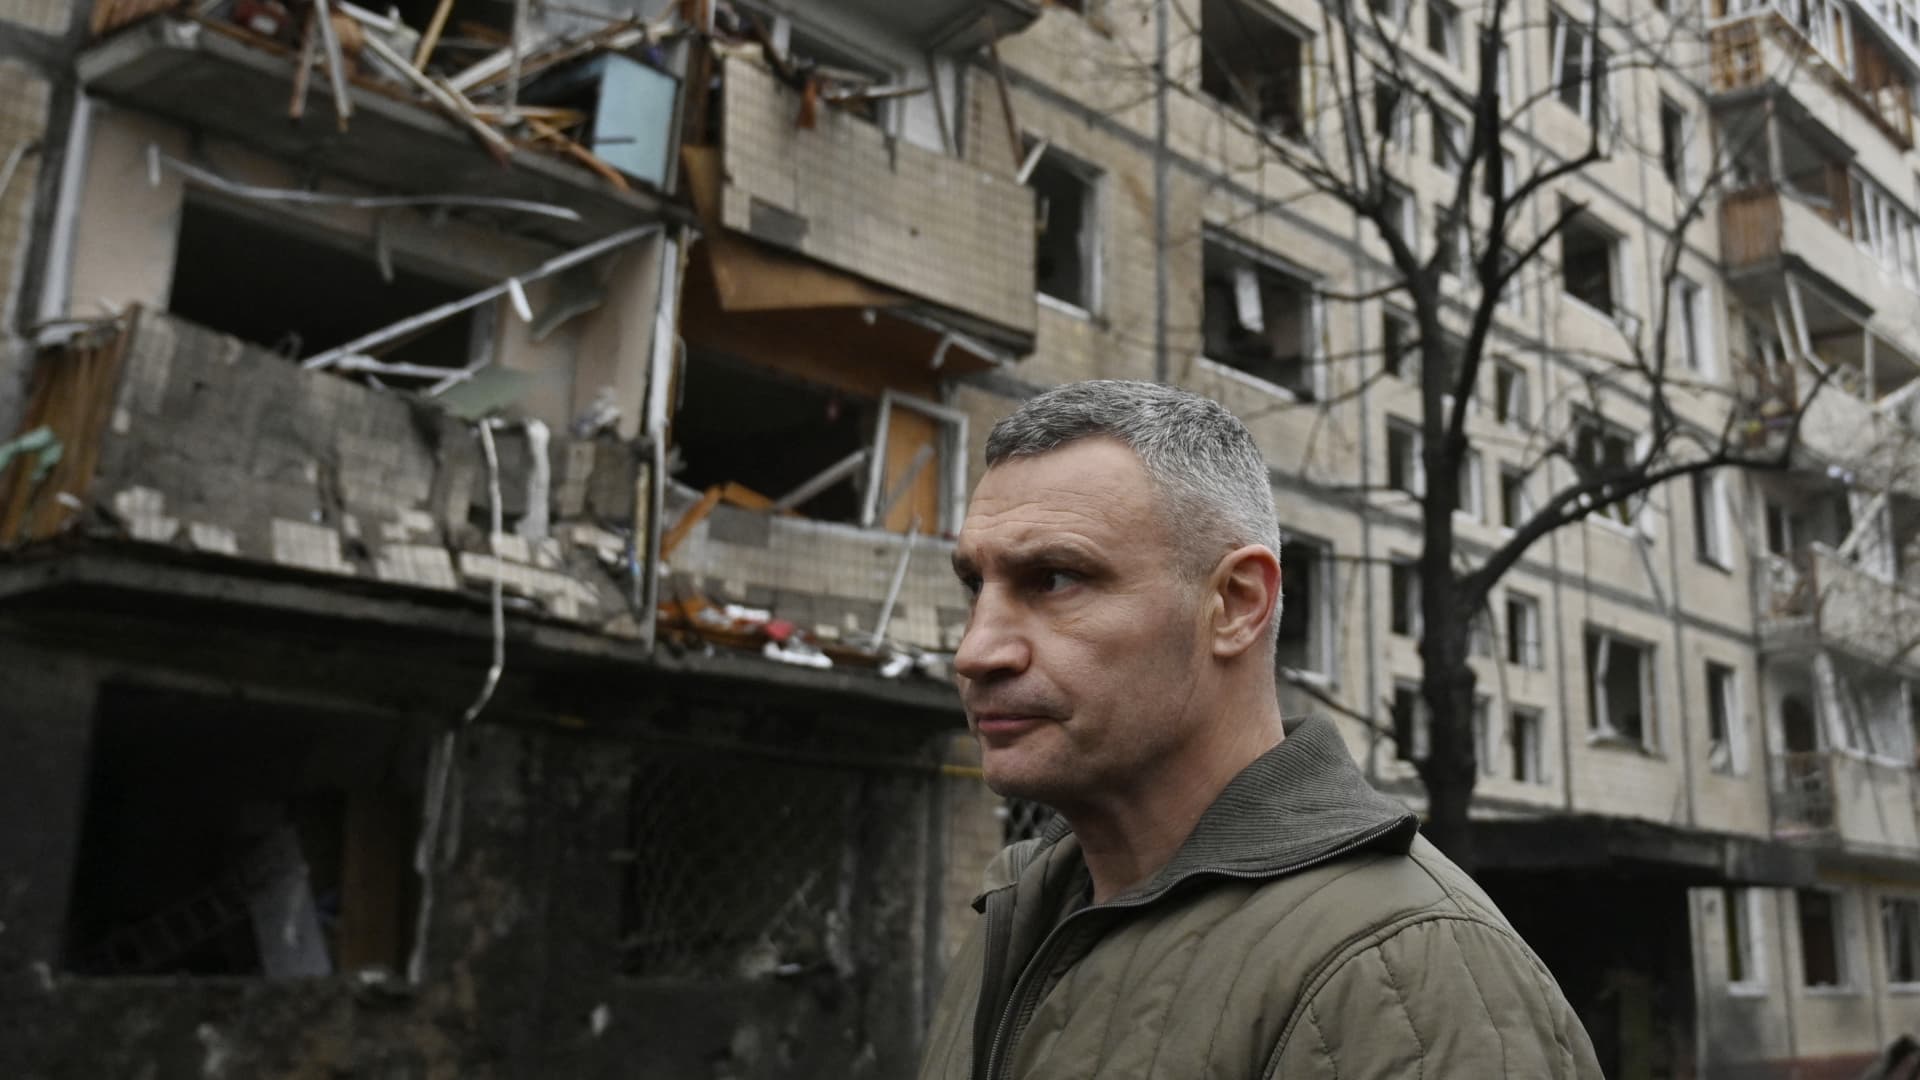 Kyiv's mayor of Vitali Klitschko stands next to a damaged residential building following a missile strike in Kyiv on December 13, 2023, amid Russian invasion of Ukraine. (Photo by SERGEI CHUZAVKOV / AFP) (Photo by SERGEI CHUZAVKOV/AFP via Getty Images)